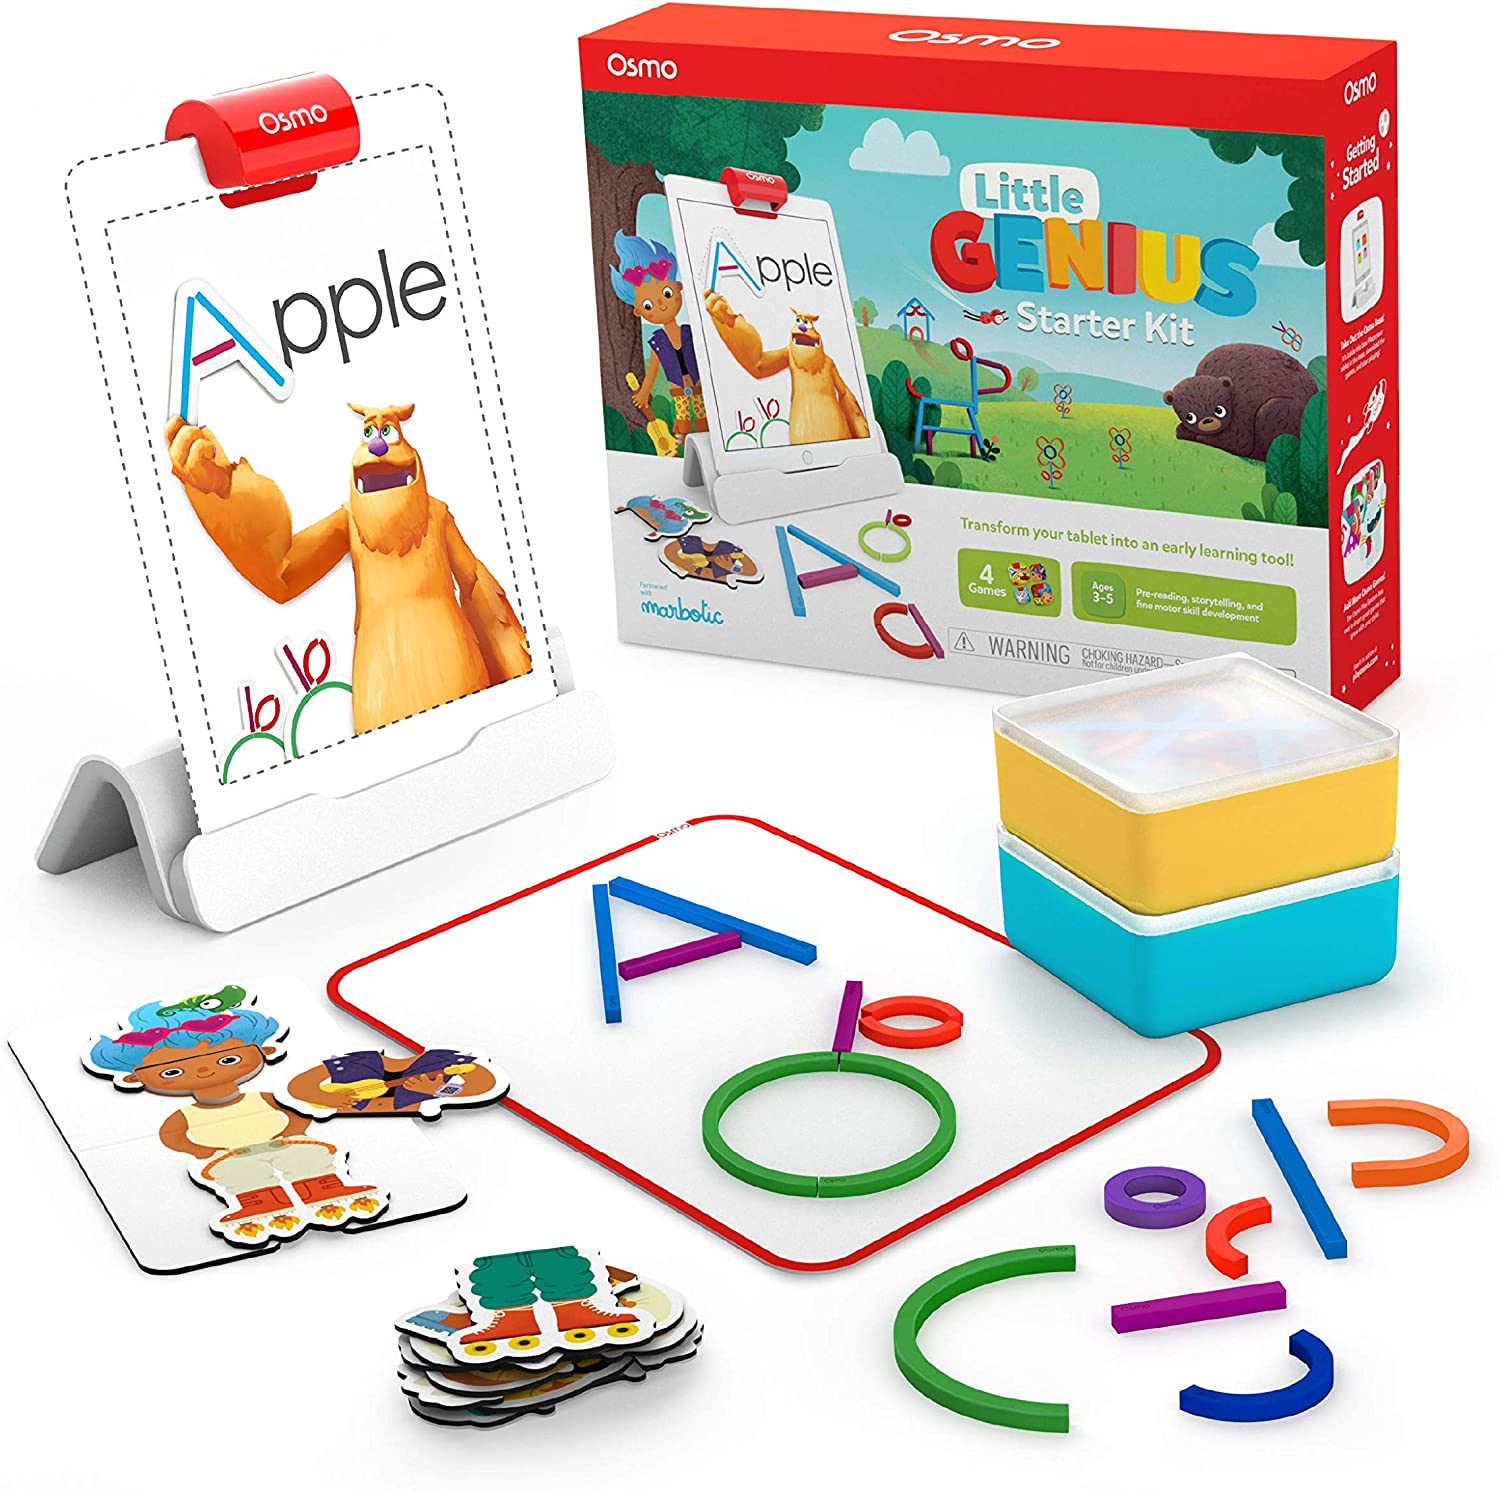 Osmo Little Genius Starter Kit w/ 4 Educational Learning Games for iPad $40 + Free Shipping